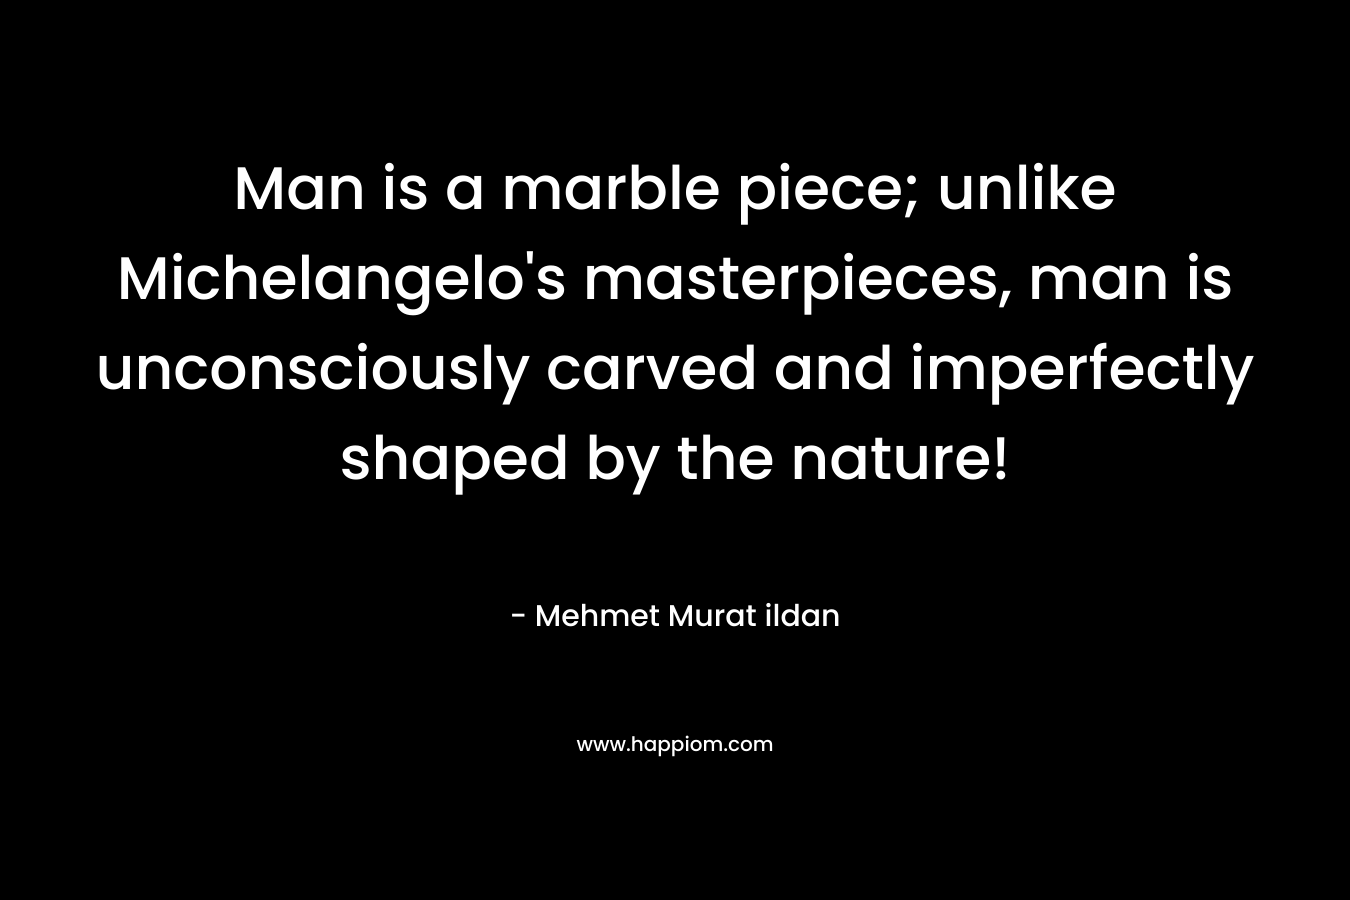 Man is a marble piece; unlike Michelangelo's masterpieces, man is unconsciously carved and imperfectly shaped by the nature!